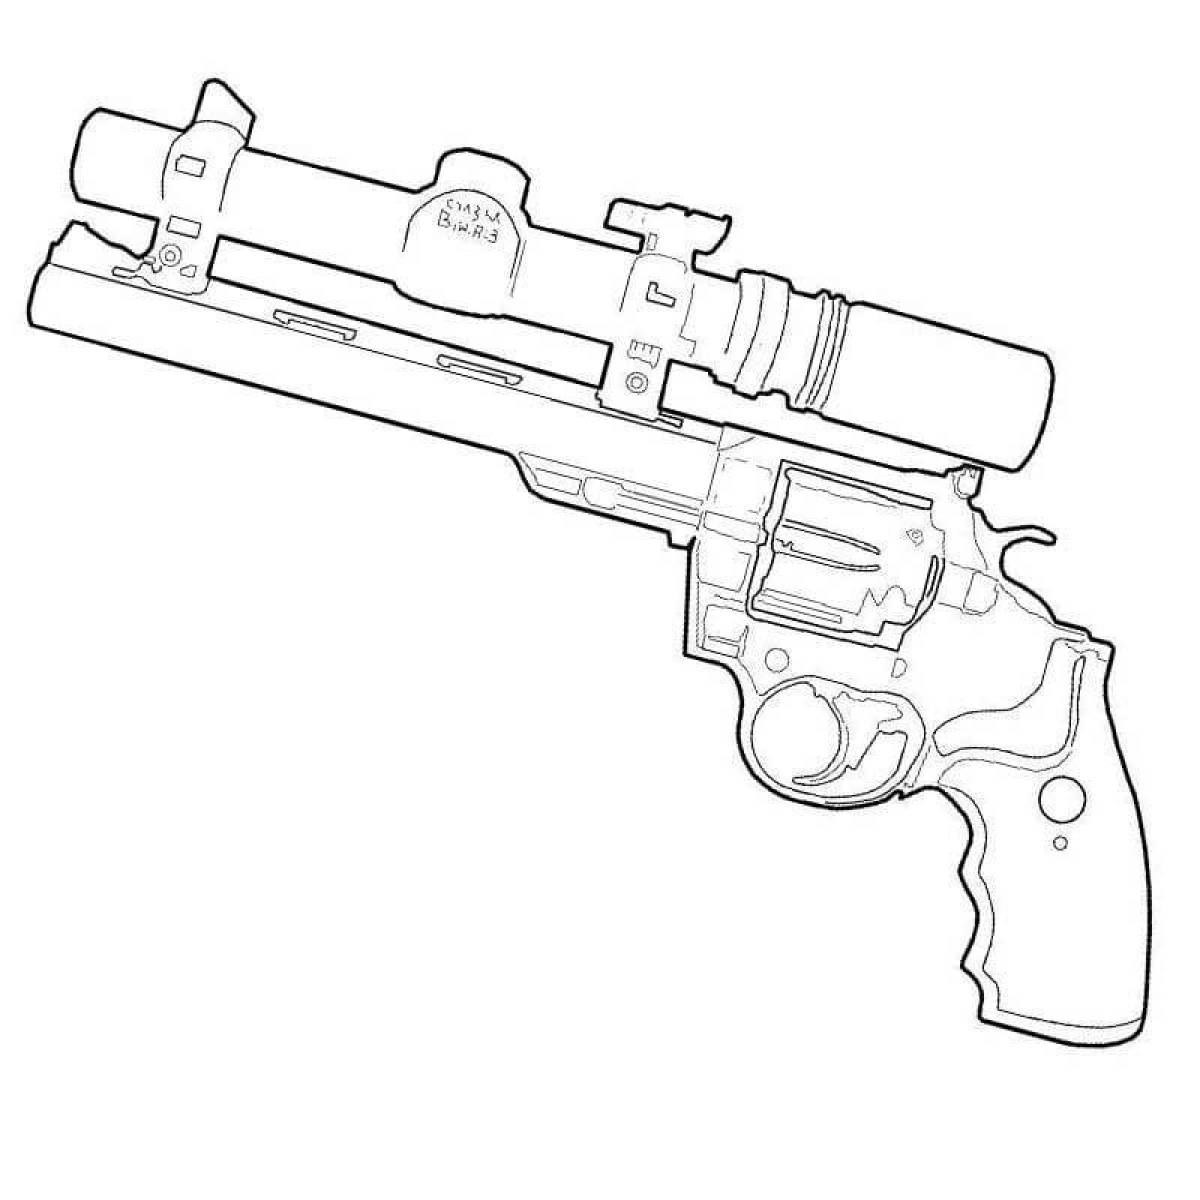 Exciting standoff 2 weapon coloring page